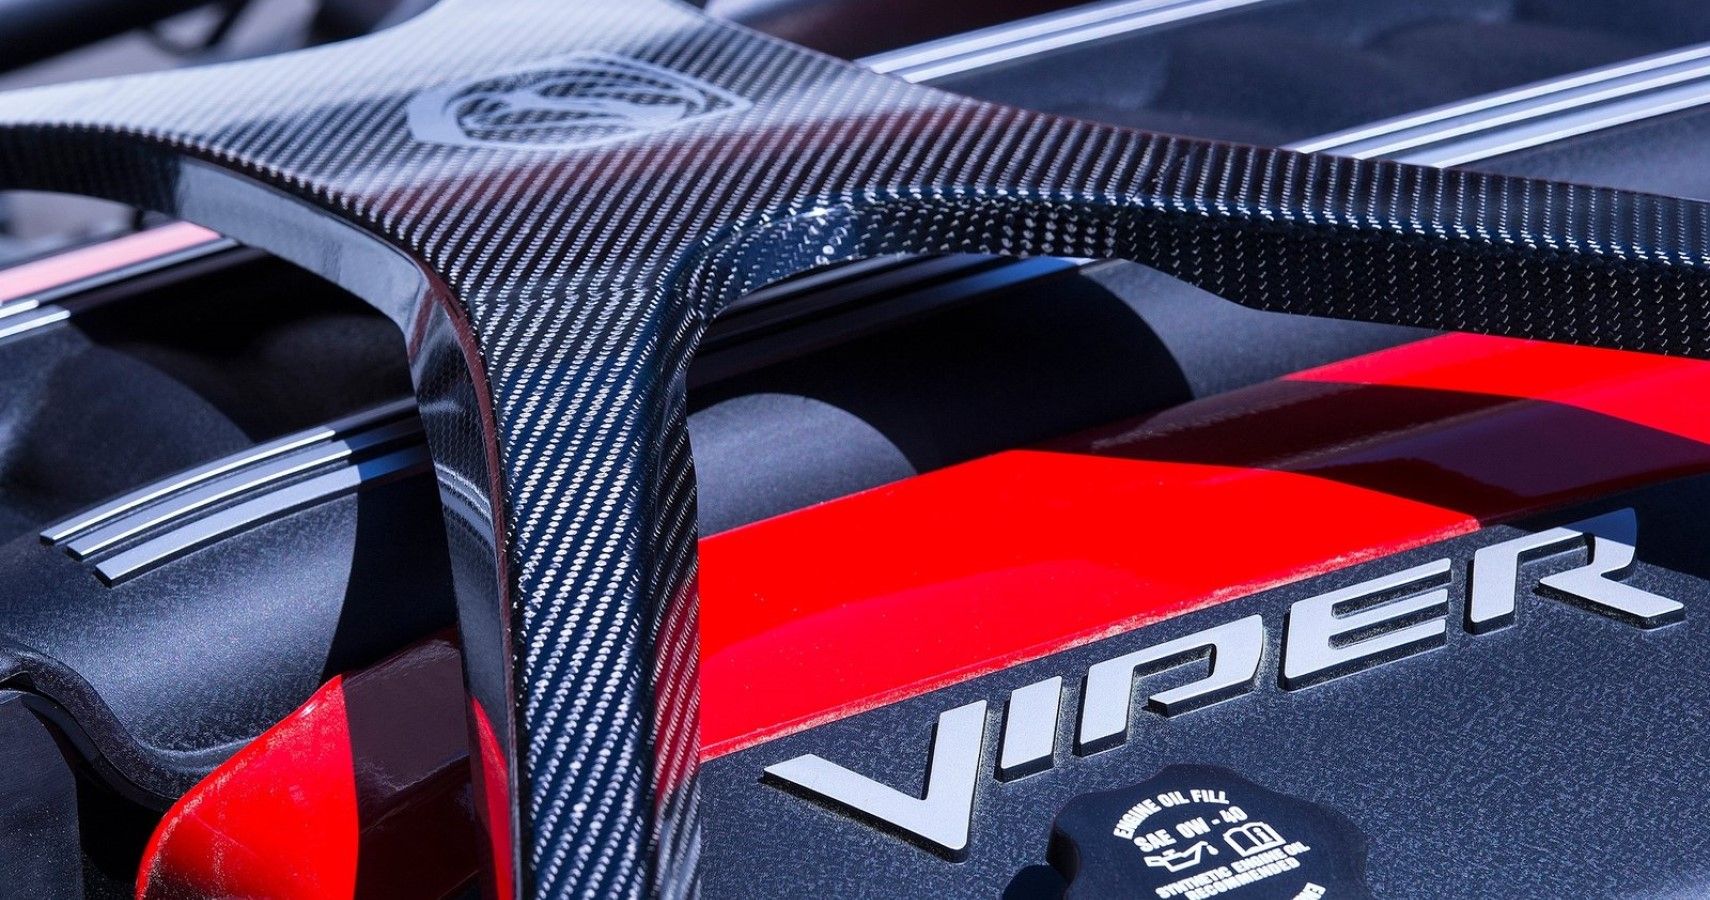 Dodge Viper ACR Extreme engine close-up view